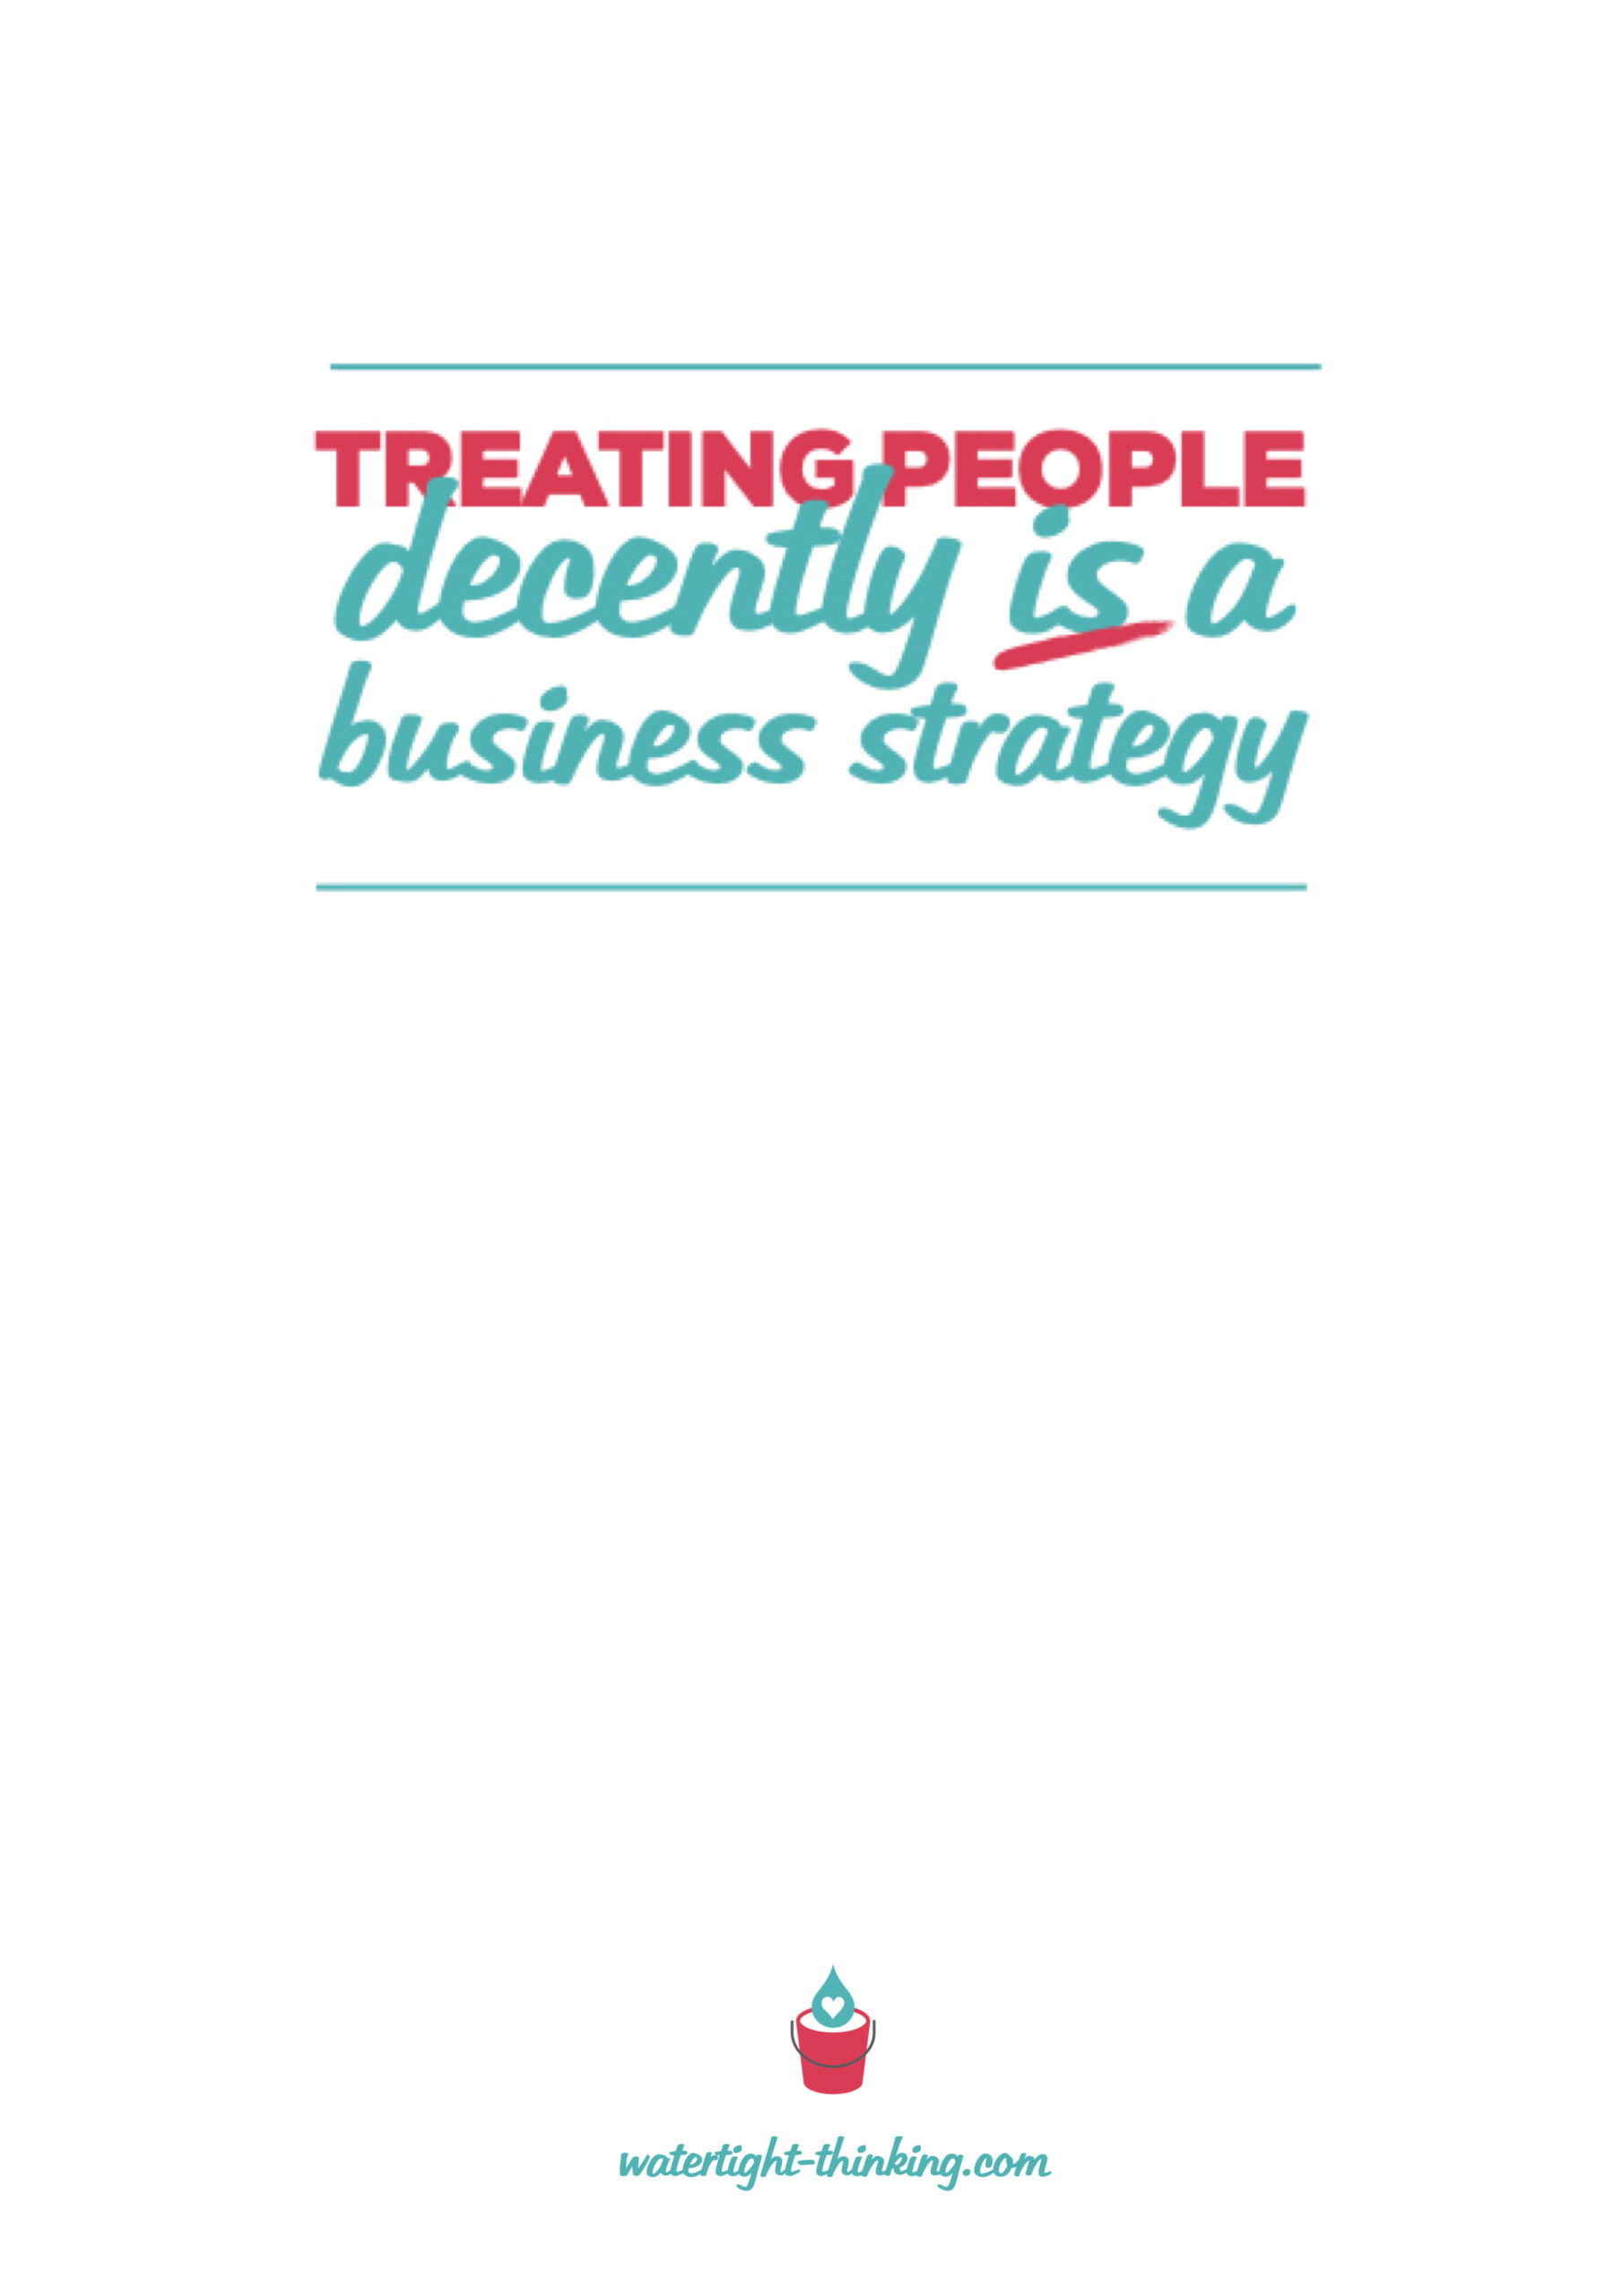 Treating People Decently is a Business Strategy